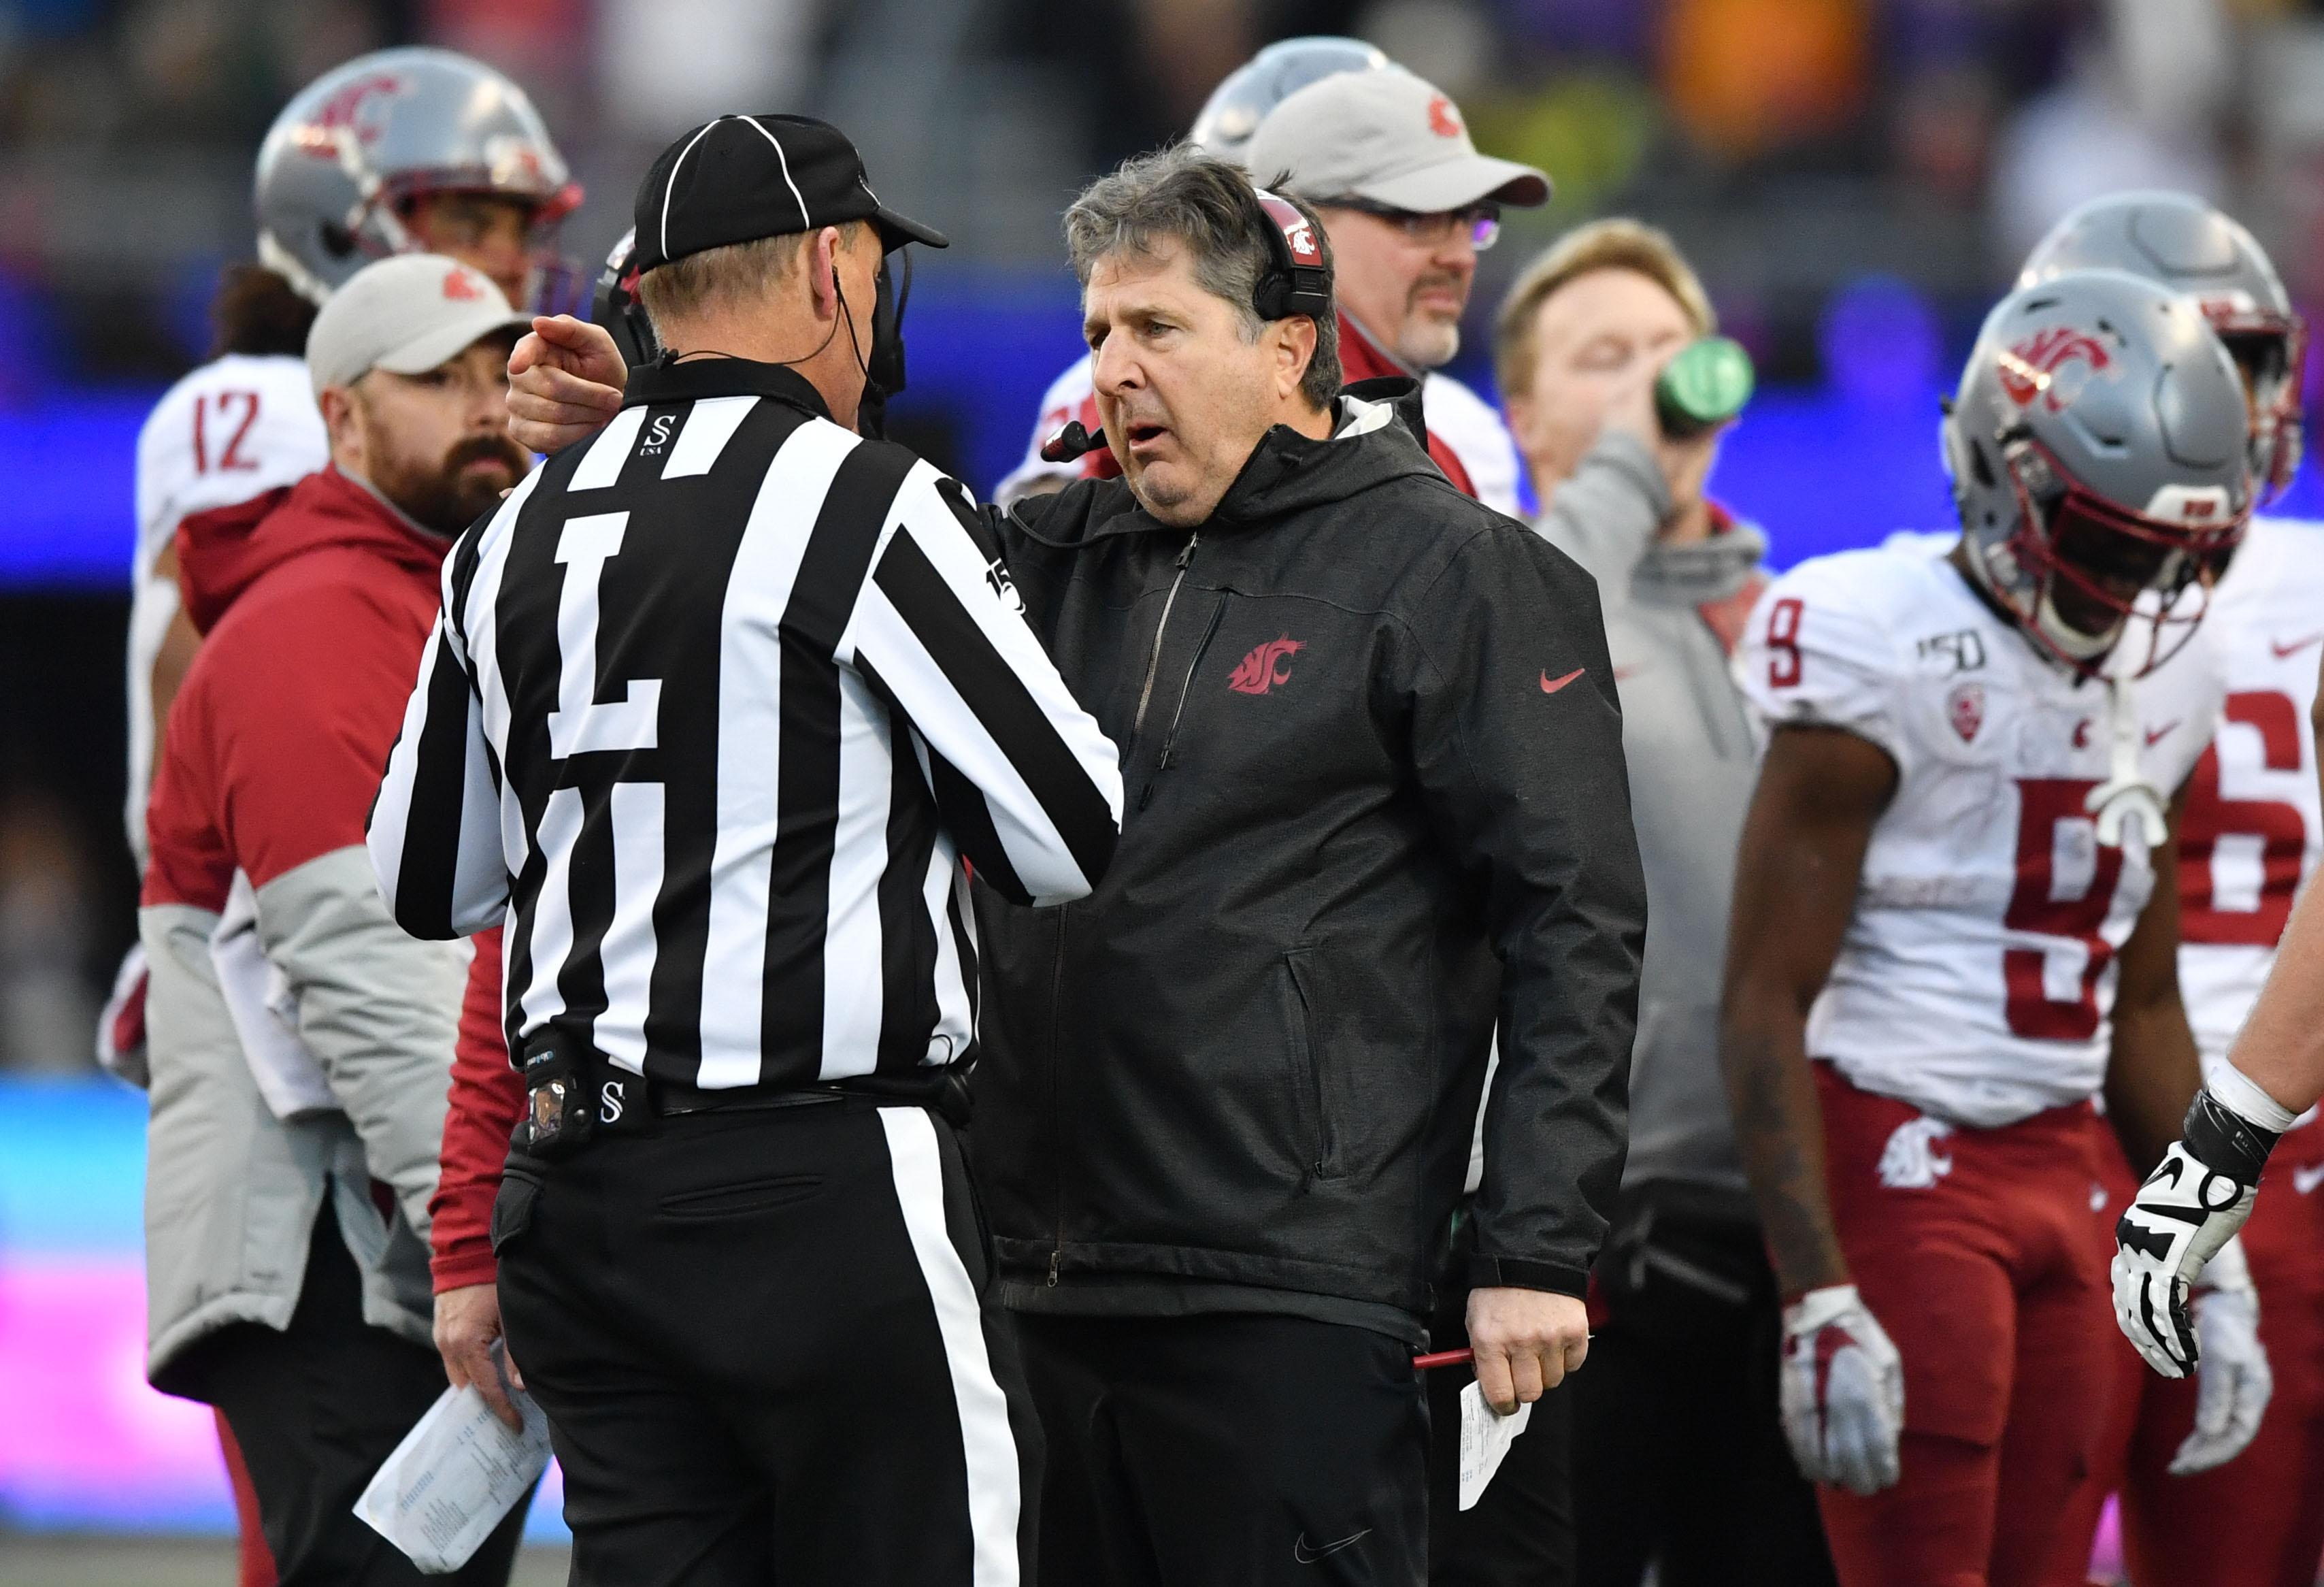 After 31 13 Apple Cup Loss, Washington State's Mike Leach